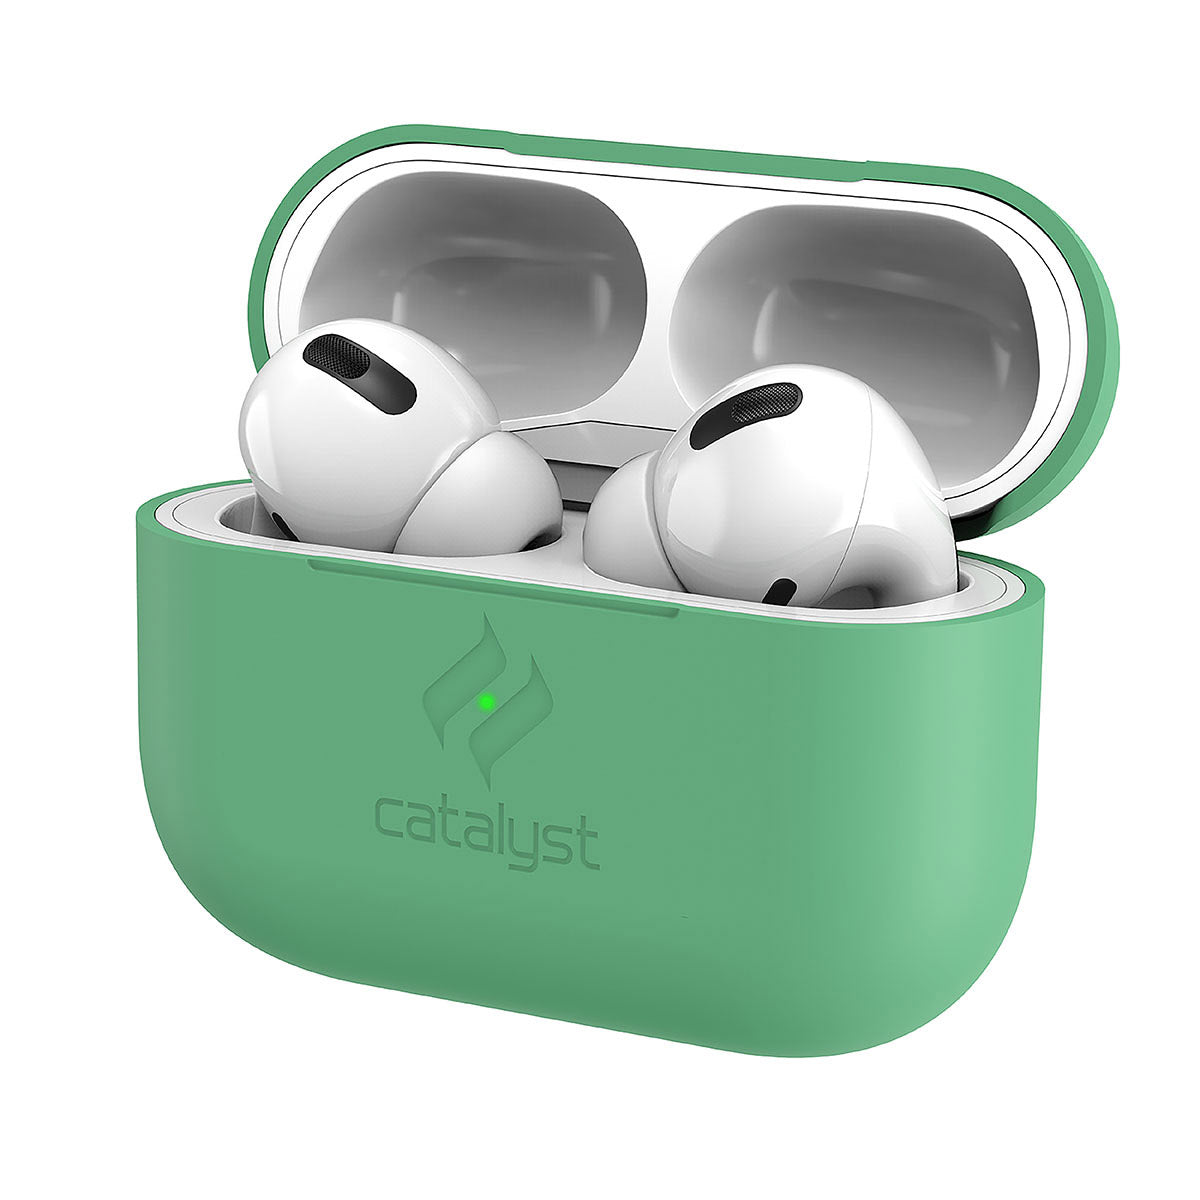 Catalyst airpods pro gen 2/1 slim case showing a closer look of front view of the case in mint green colorway